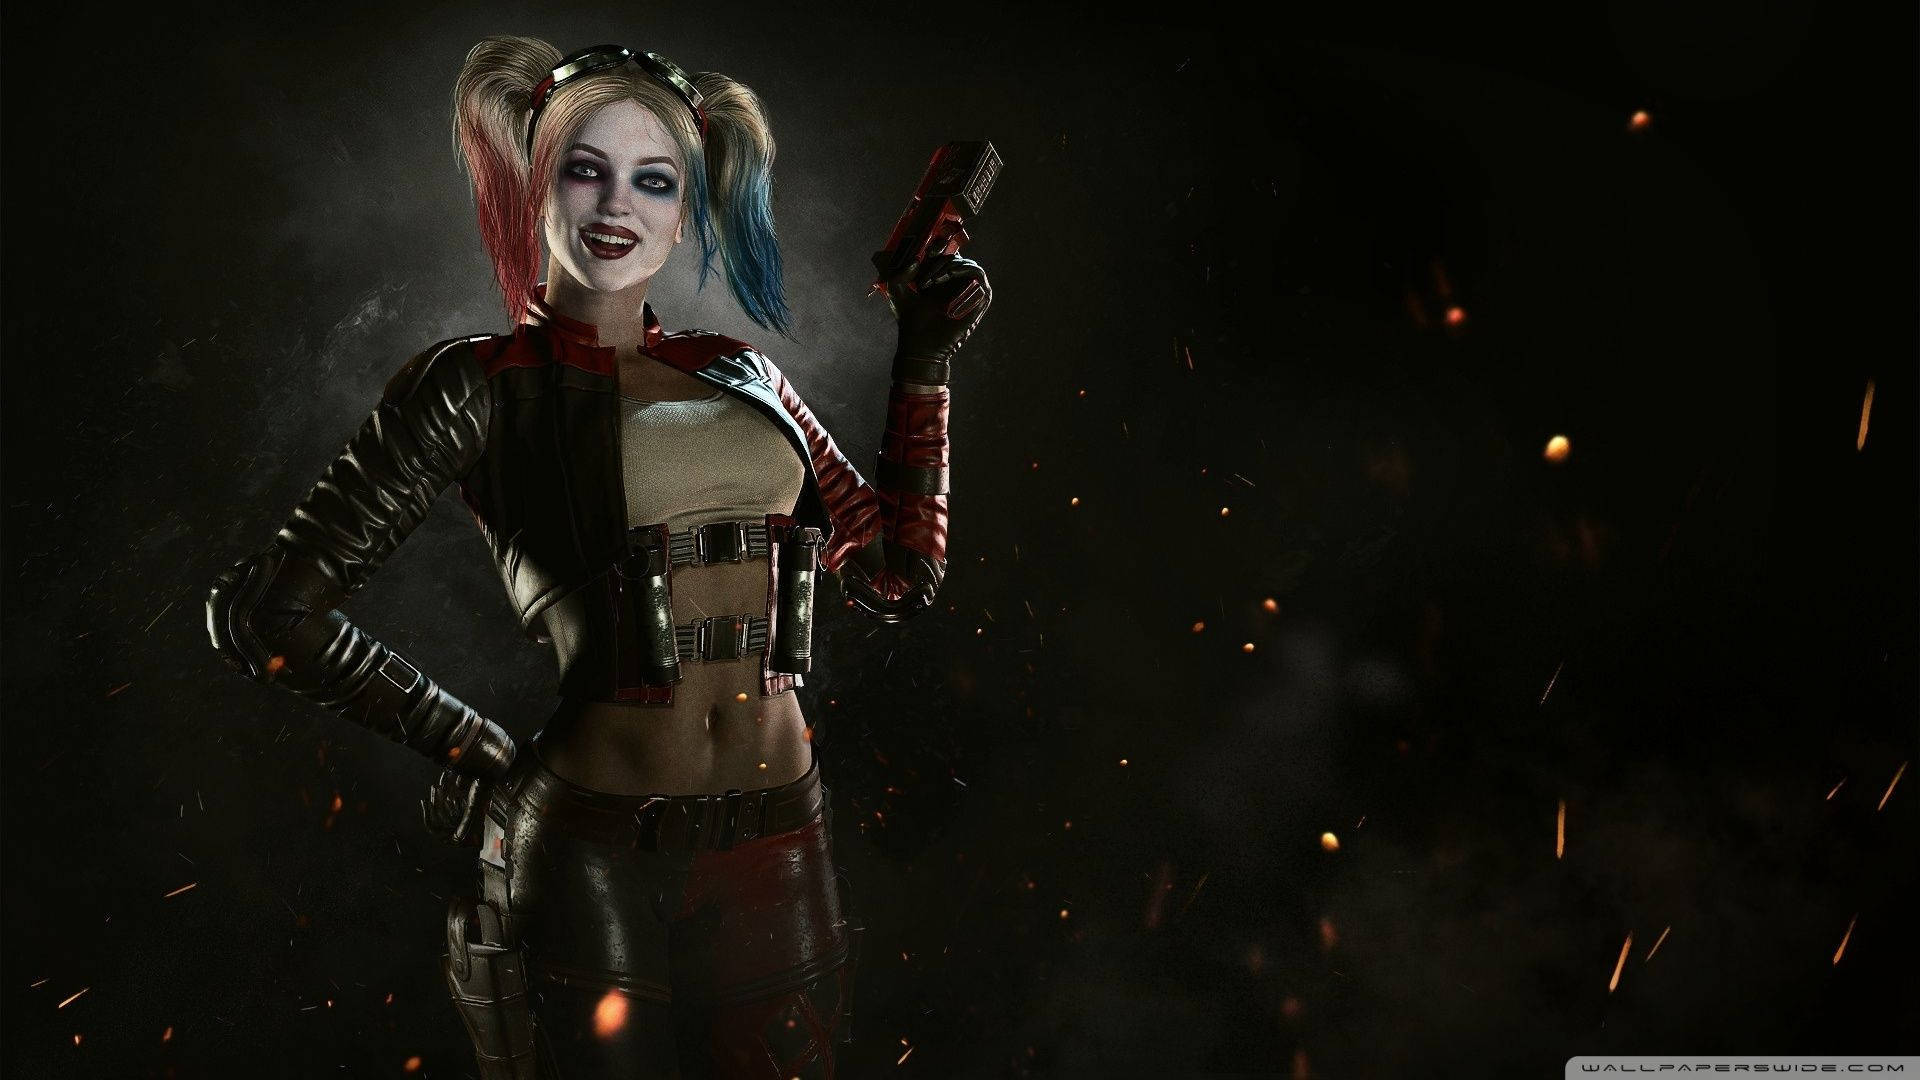 Shiny Leather Outfit Harley Quinn 4K Wallpaper